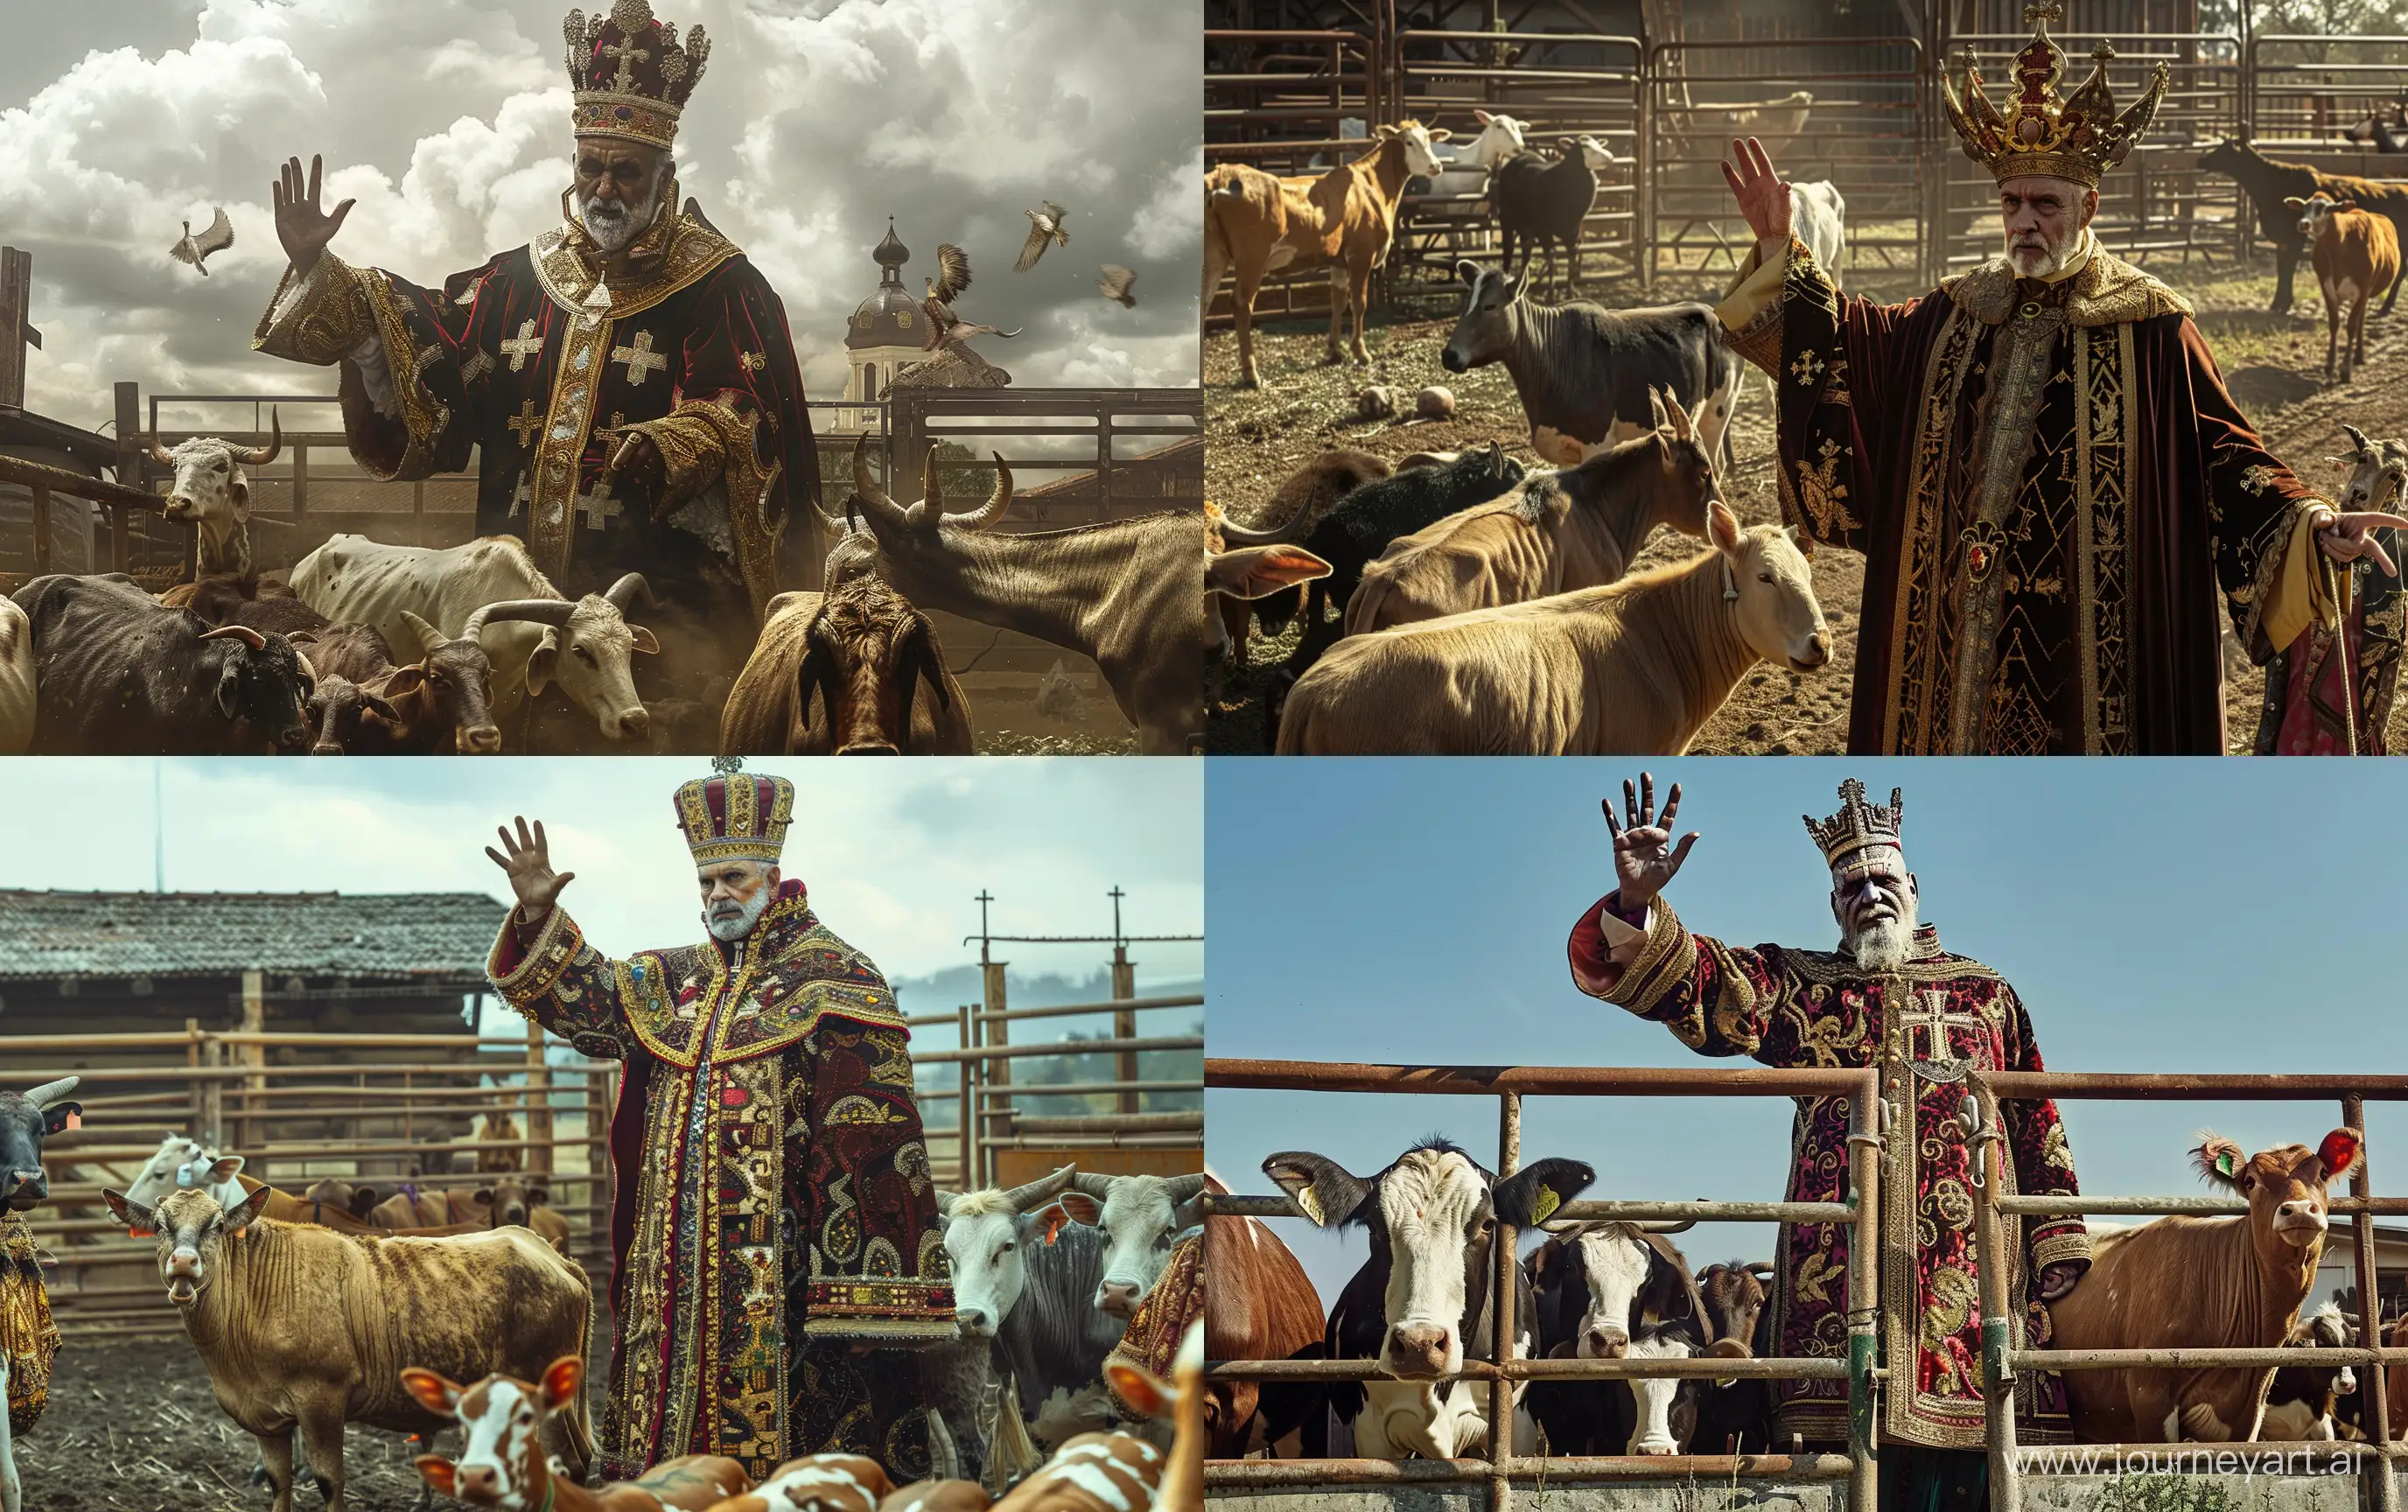 Big fugure of the great inquisitor in expensive Jesuit ritual clothes stands above corral with different herbivorous animals in it with hand up, --ar 16:10